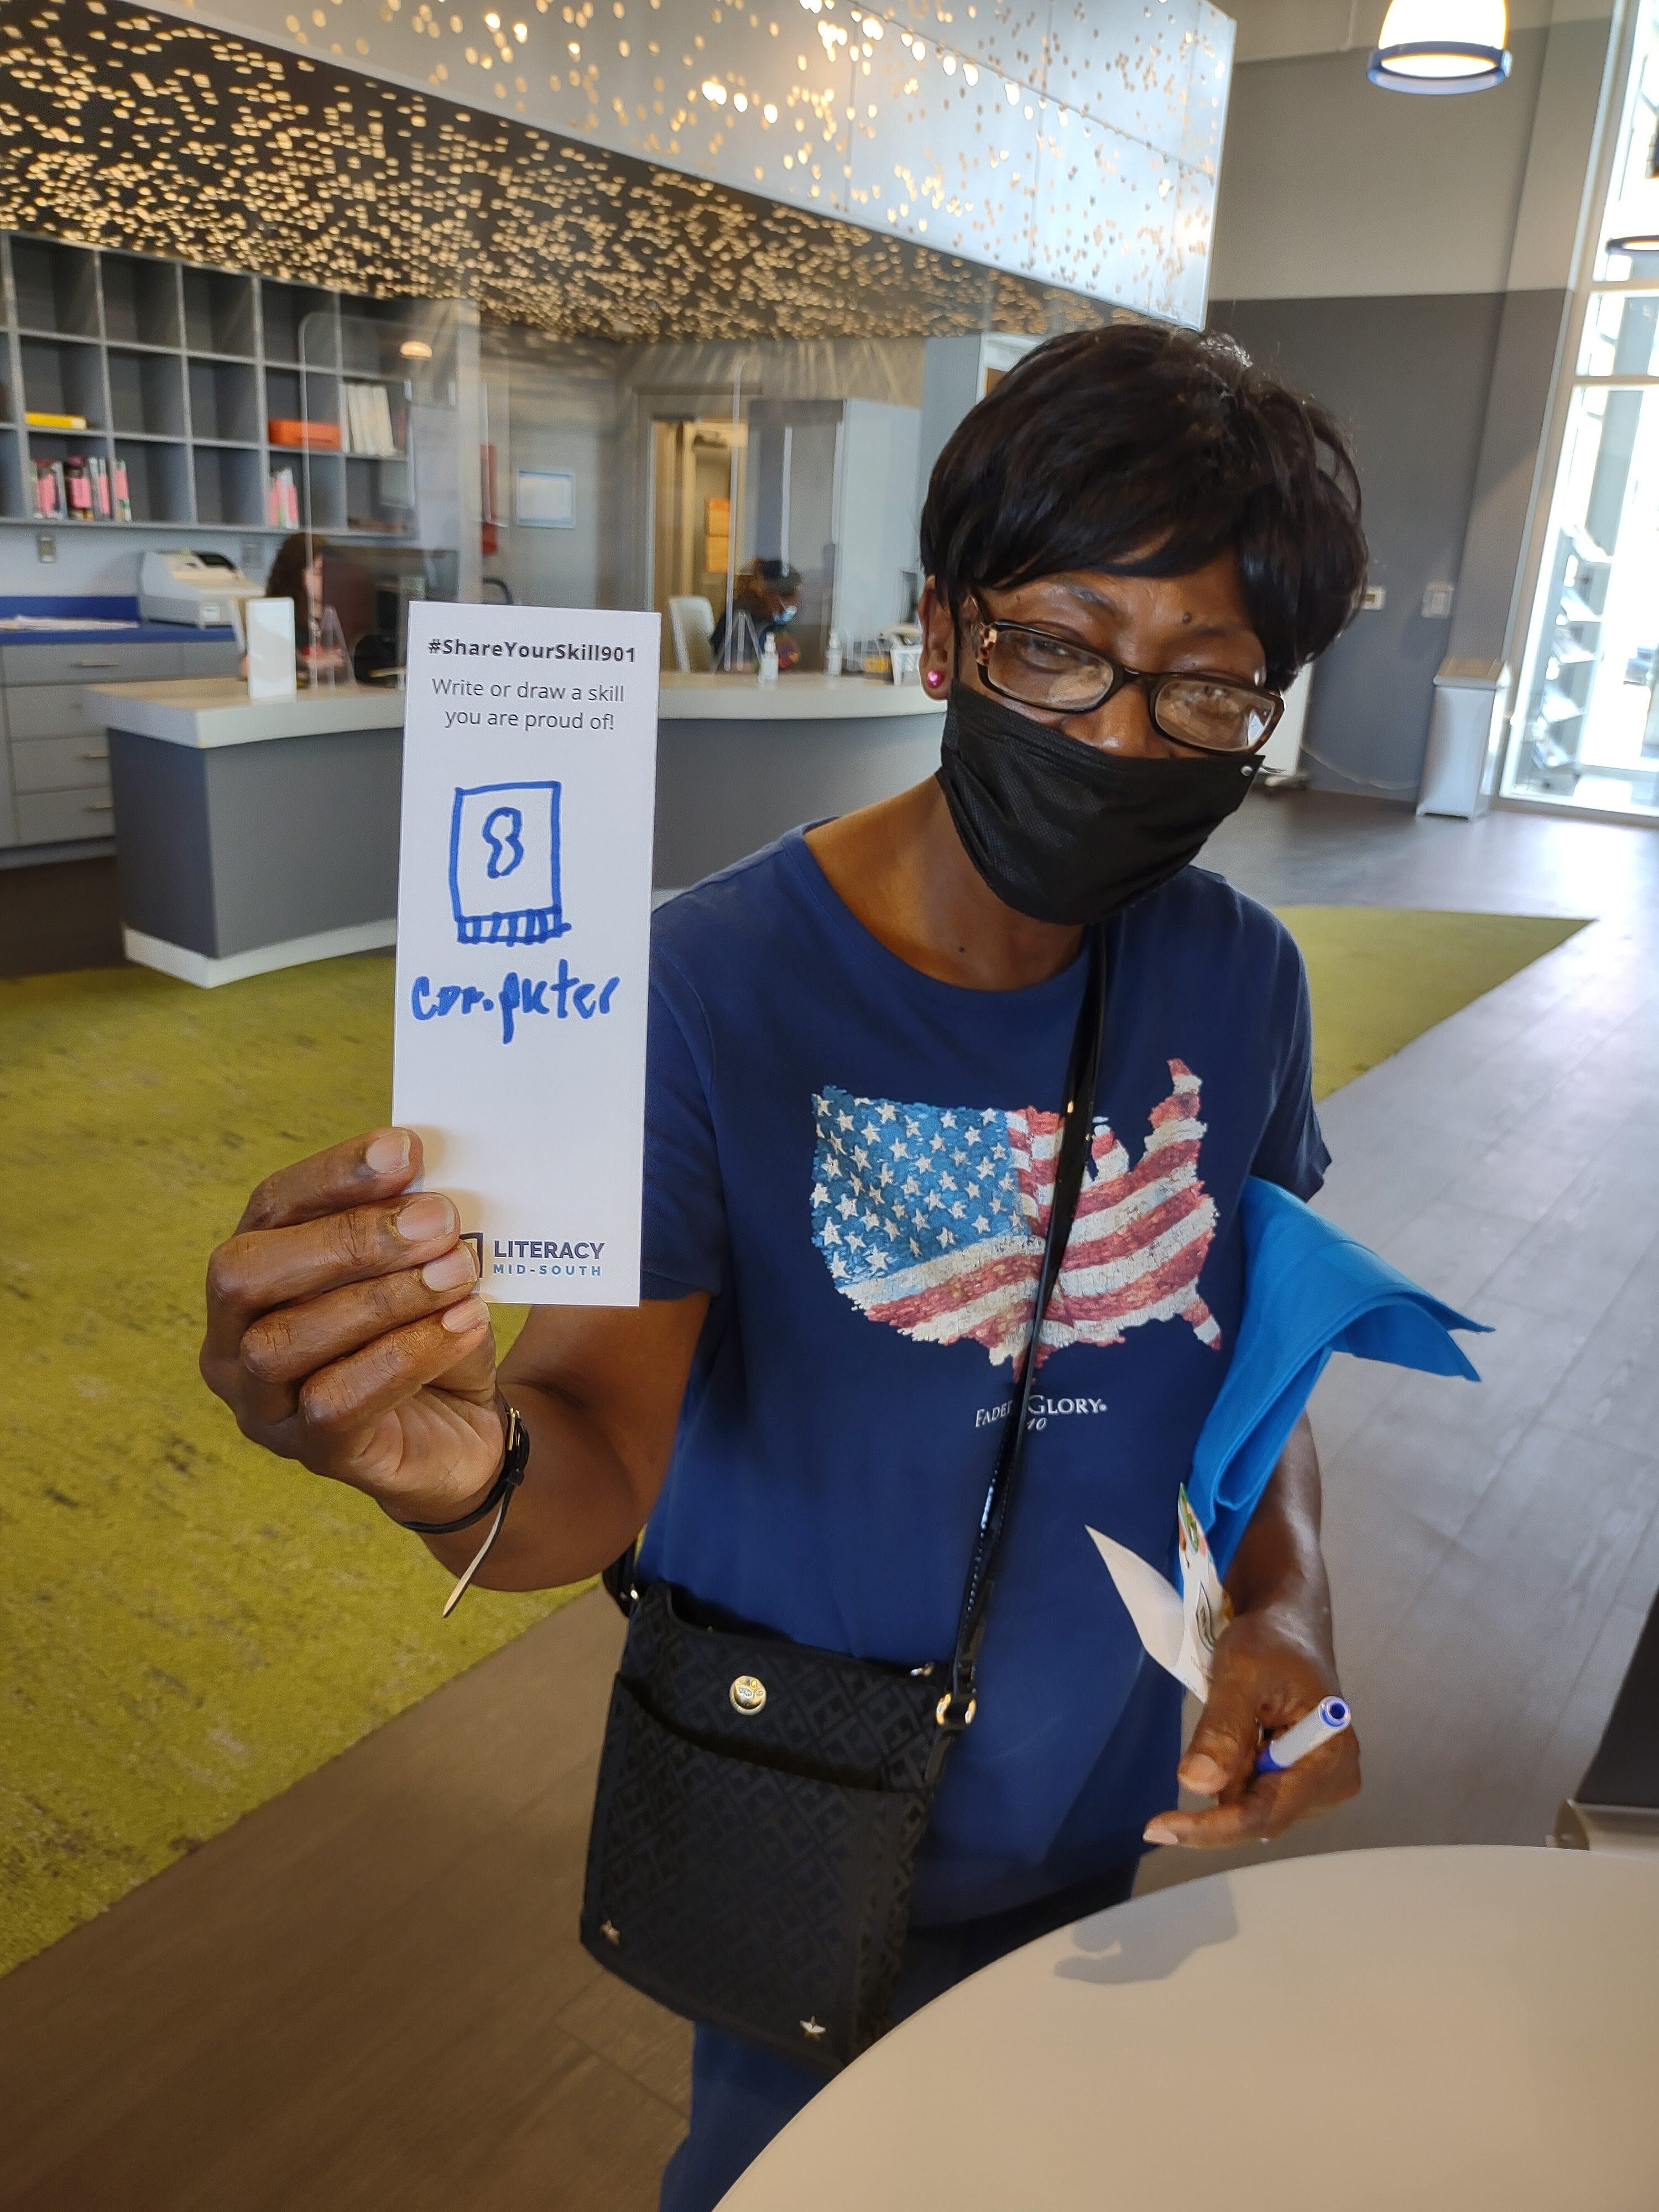 A #ShareYourSkill901 participant shows her written skill on a bookmark. (Photo courtesy of Literacy Mid-South)